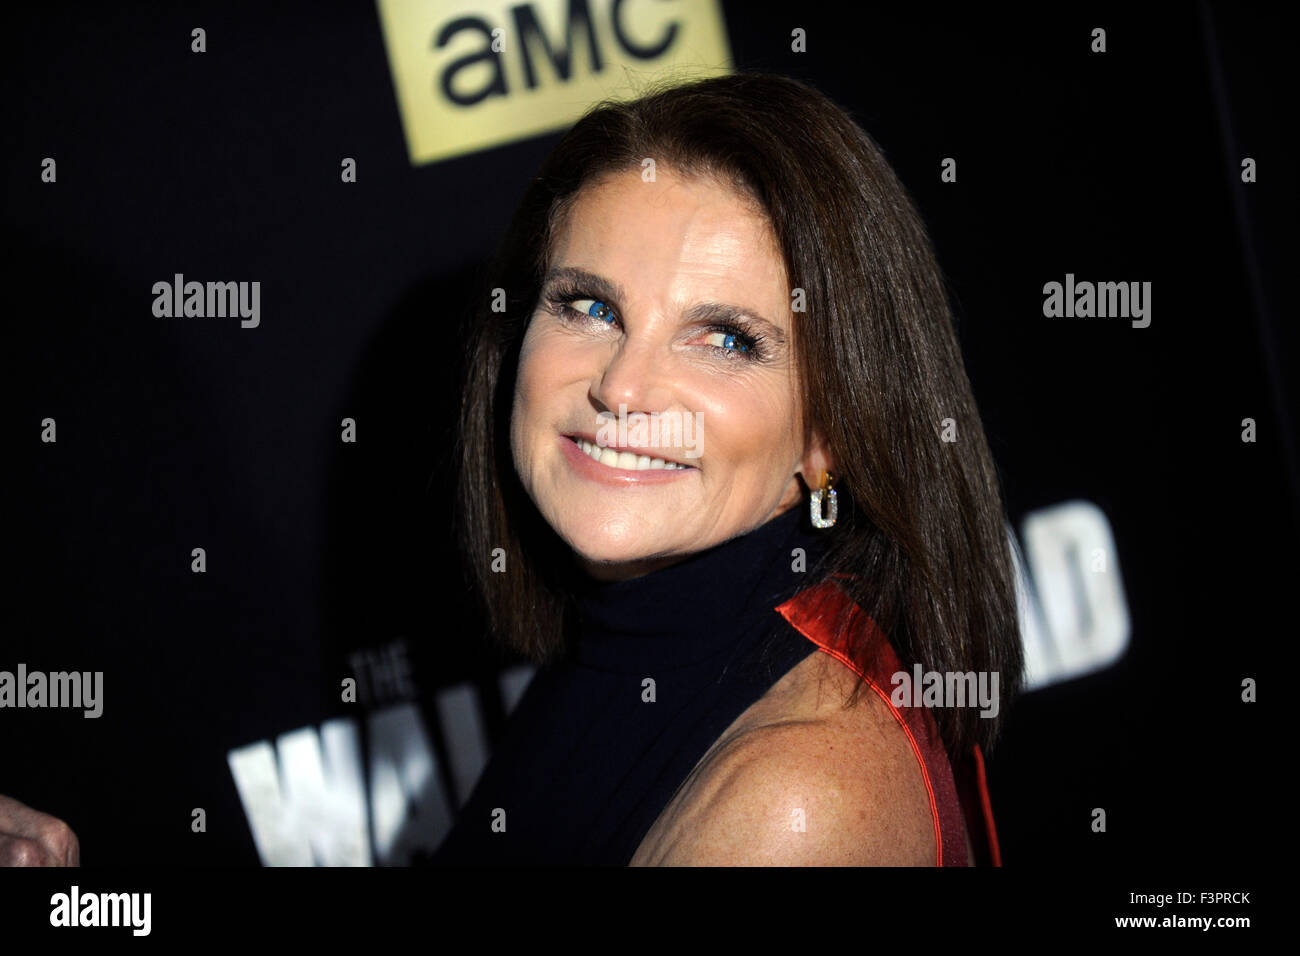 New York City. 9th Oct, 2015. Tovah Feldshuh attends AMC's 'The Walking Dead' Season 6 Fan Premiere Event 2015 at Madison Square Garden on October 9, 2015 in New York City. © dpa/Alamy Live News Stock Photo